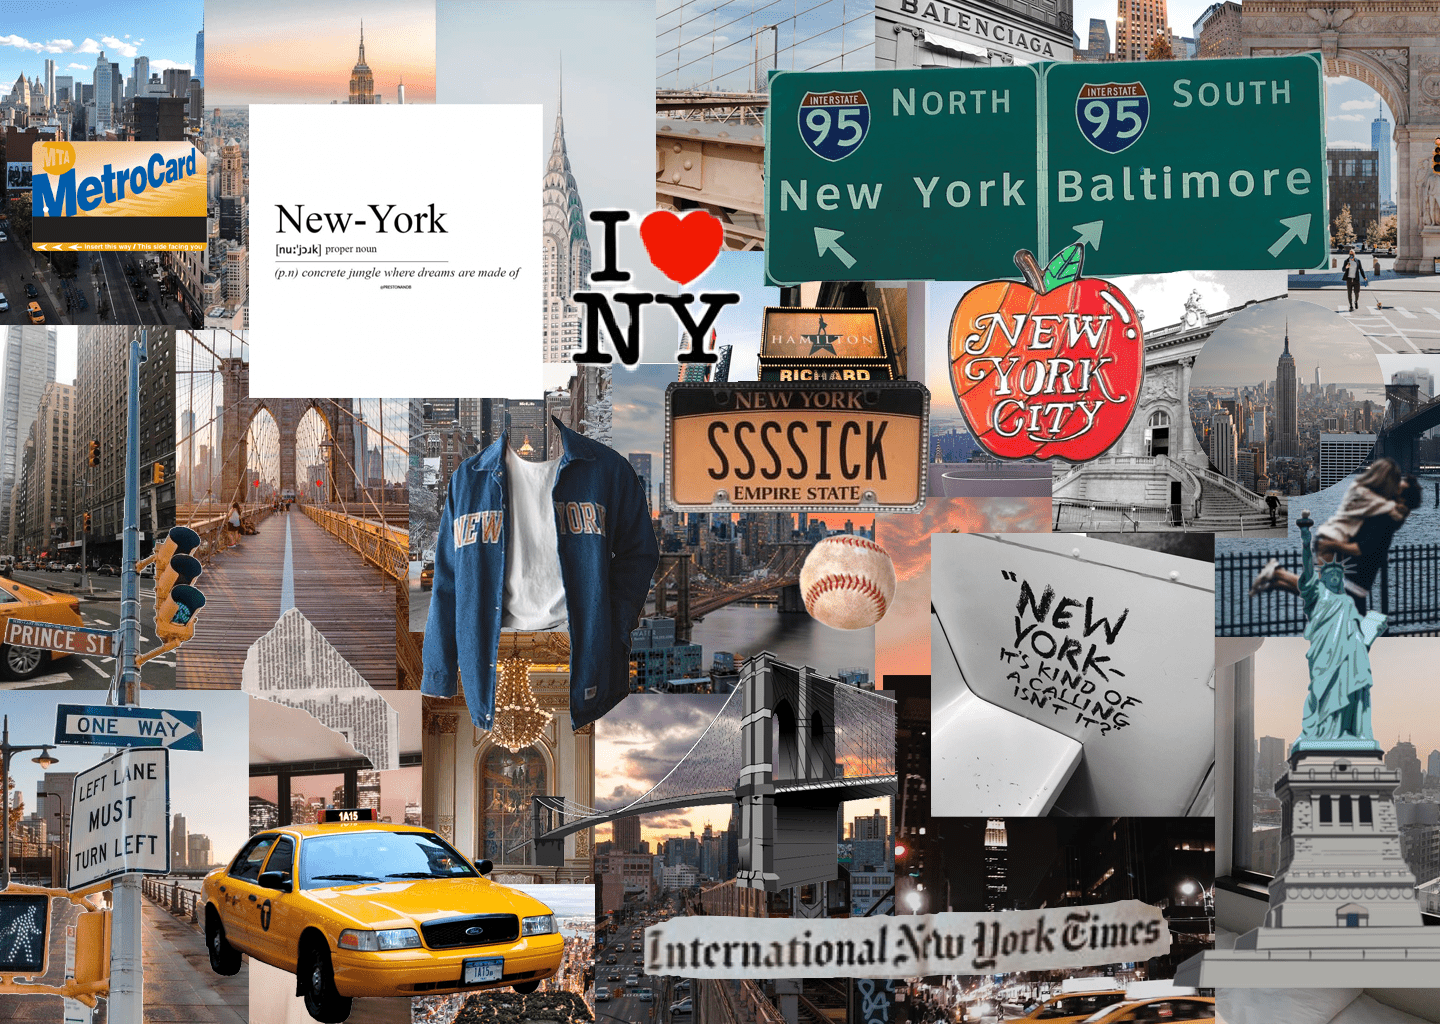 A collage of images of New York City, including the Brooklyn Bridge, taxi cabs, and billboards. - New York